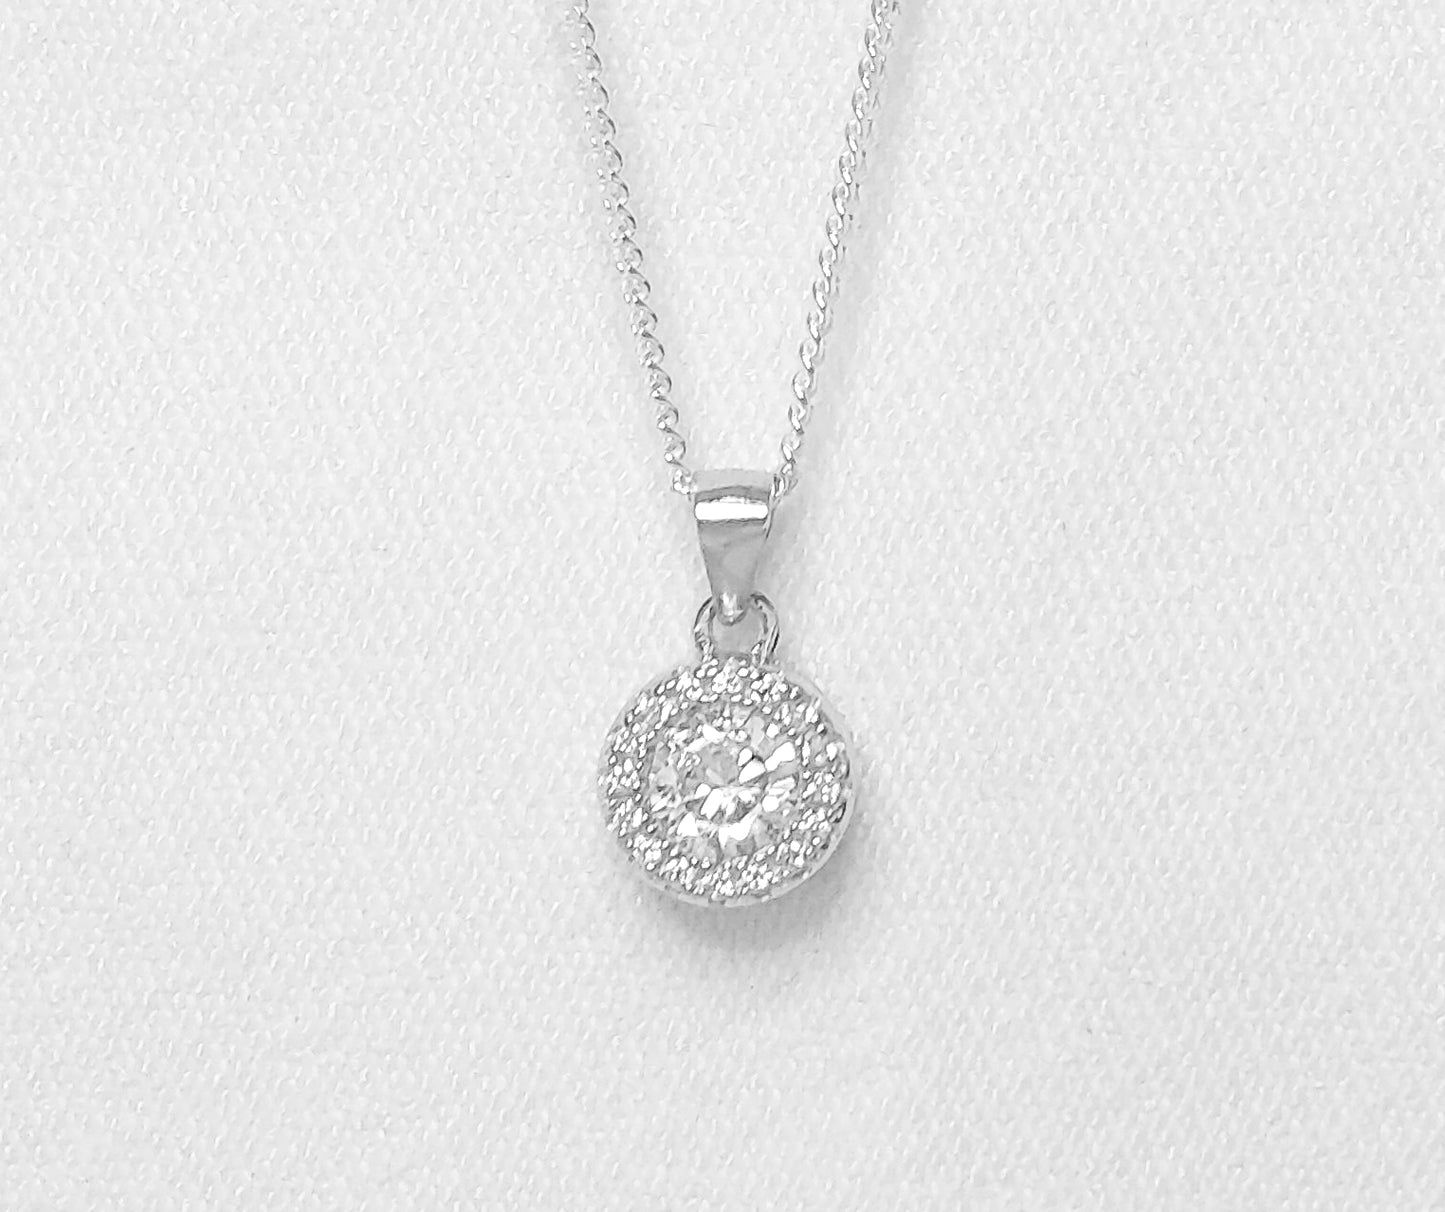 Sterling Silver Pendant with Cubic Zirconia Stones. Circle of Life